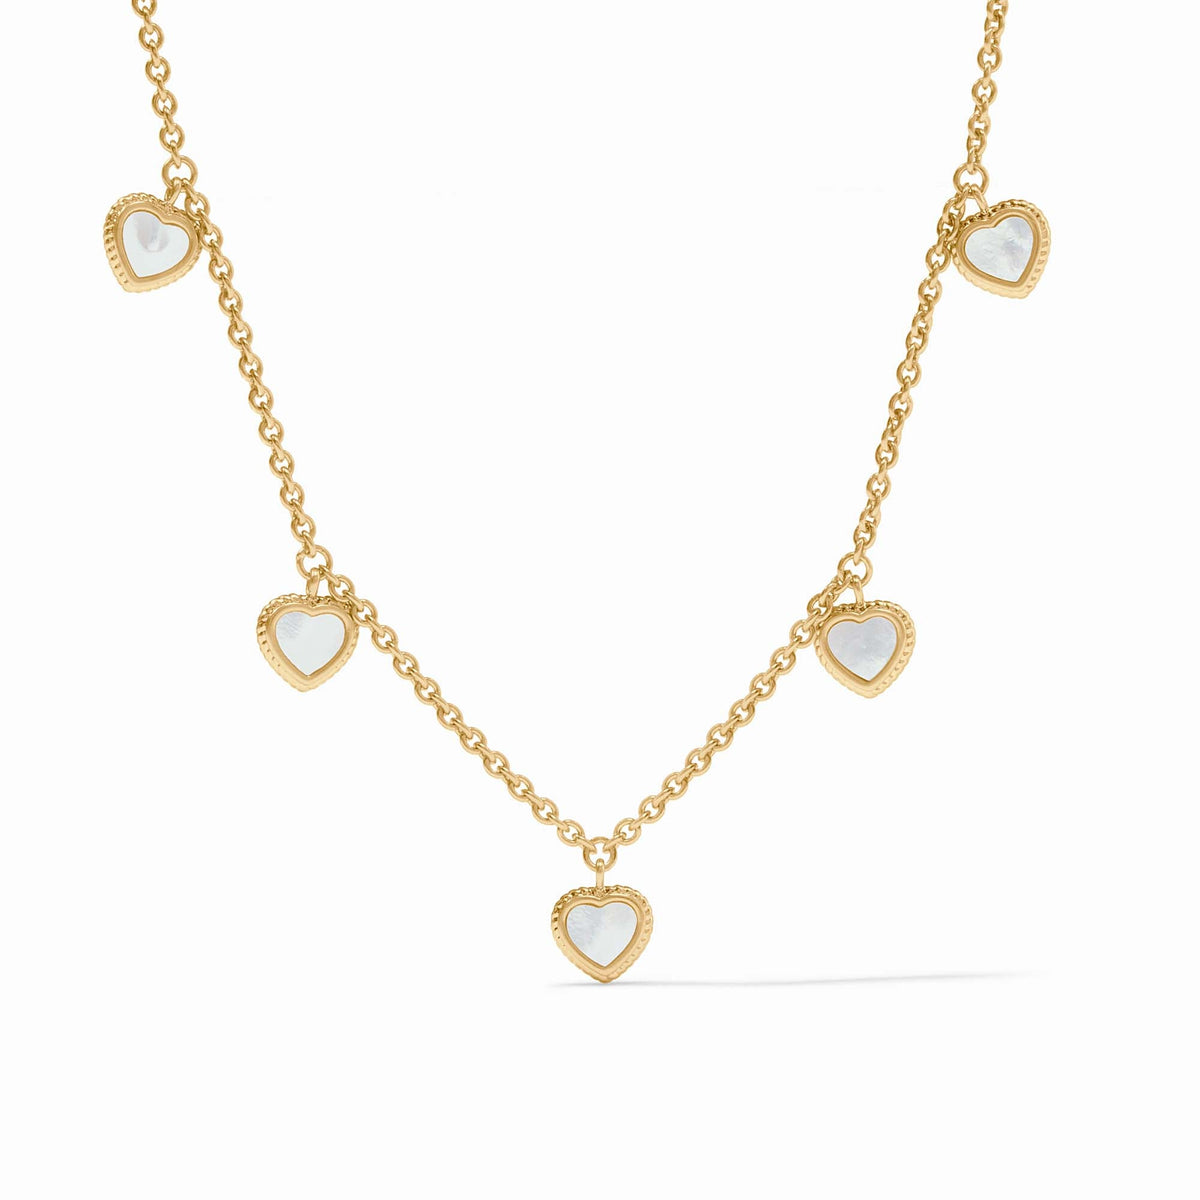 Heart Delicate Charm Necklace